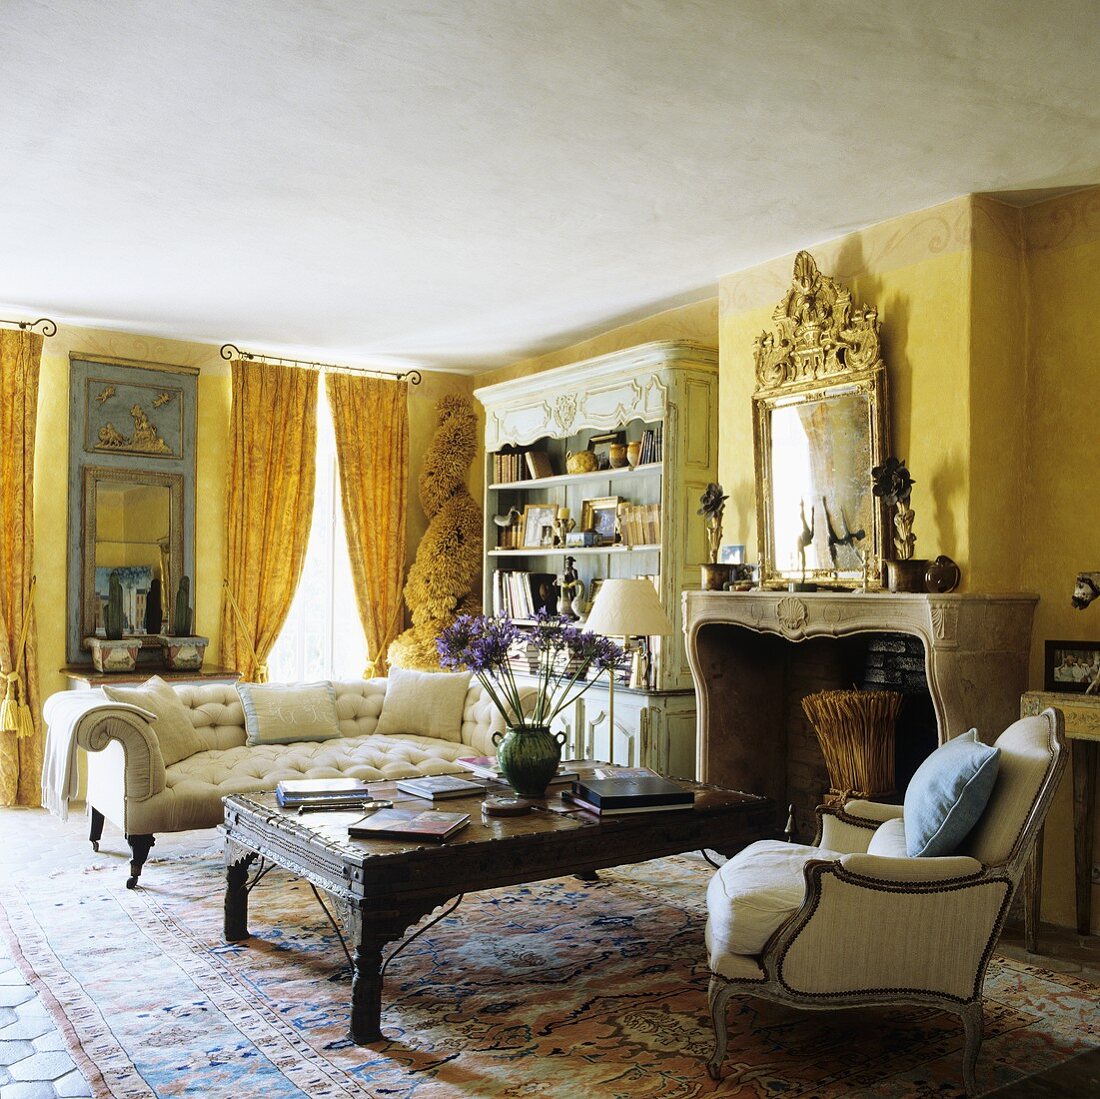 A living room with yellow walls - an antique sofa and a coffee table in front of a fireplace